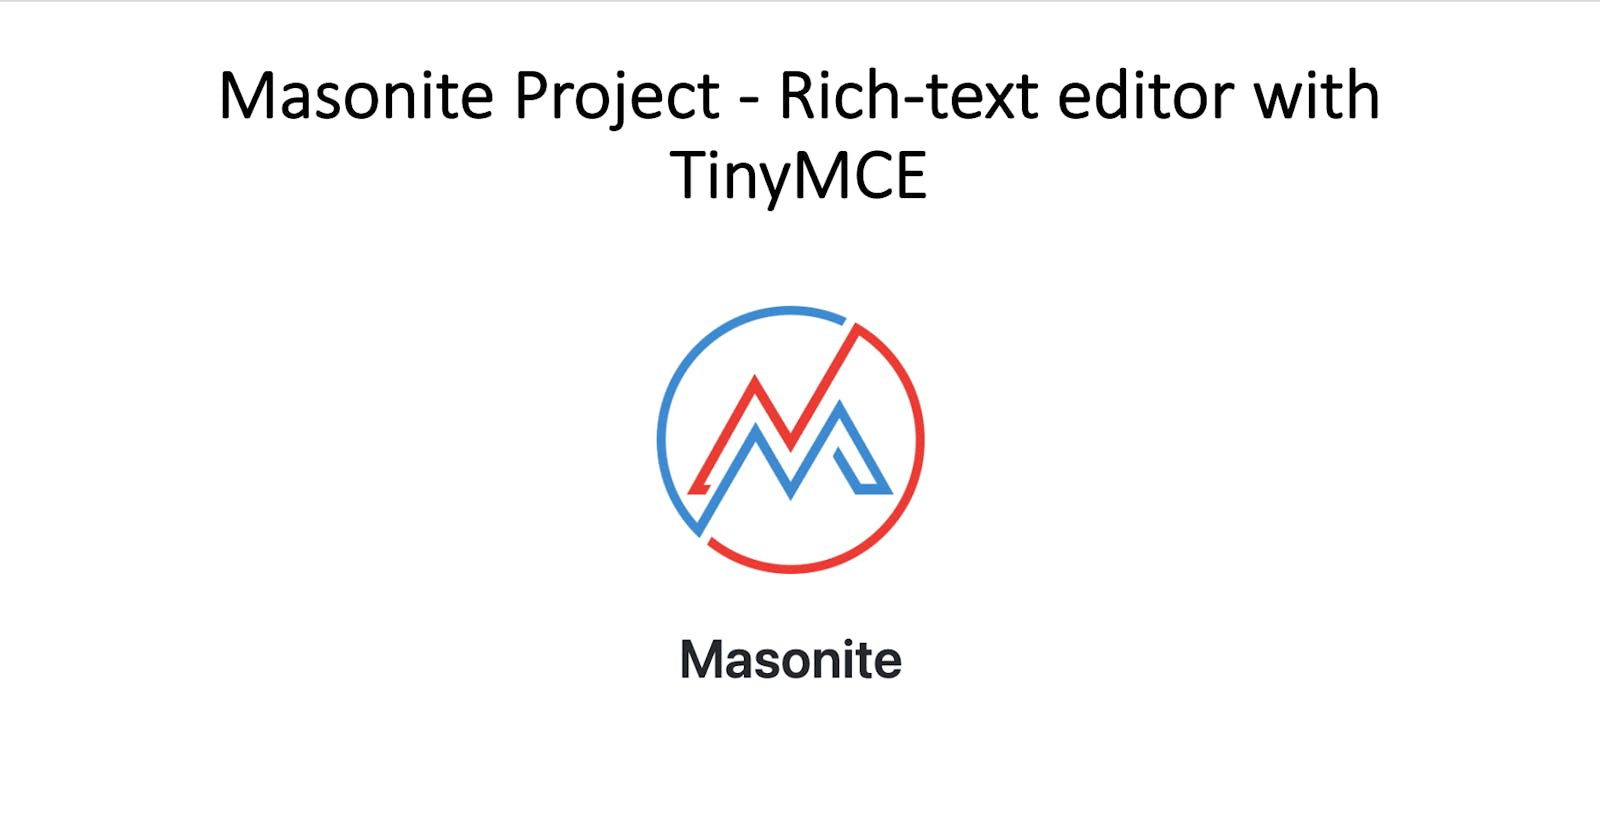 Masonite Project - Rich-text editor with TinyMCE